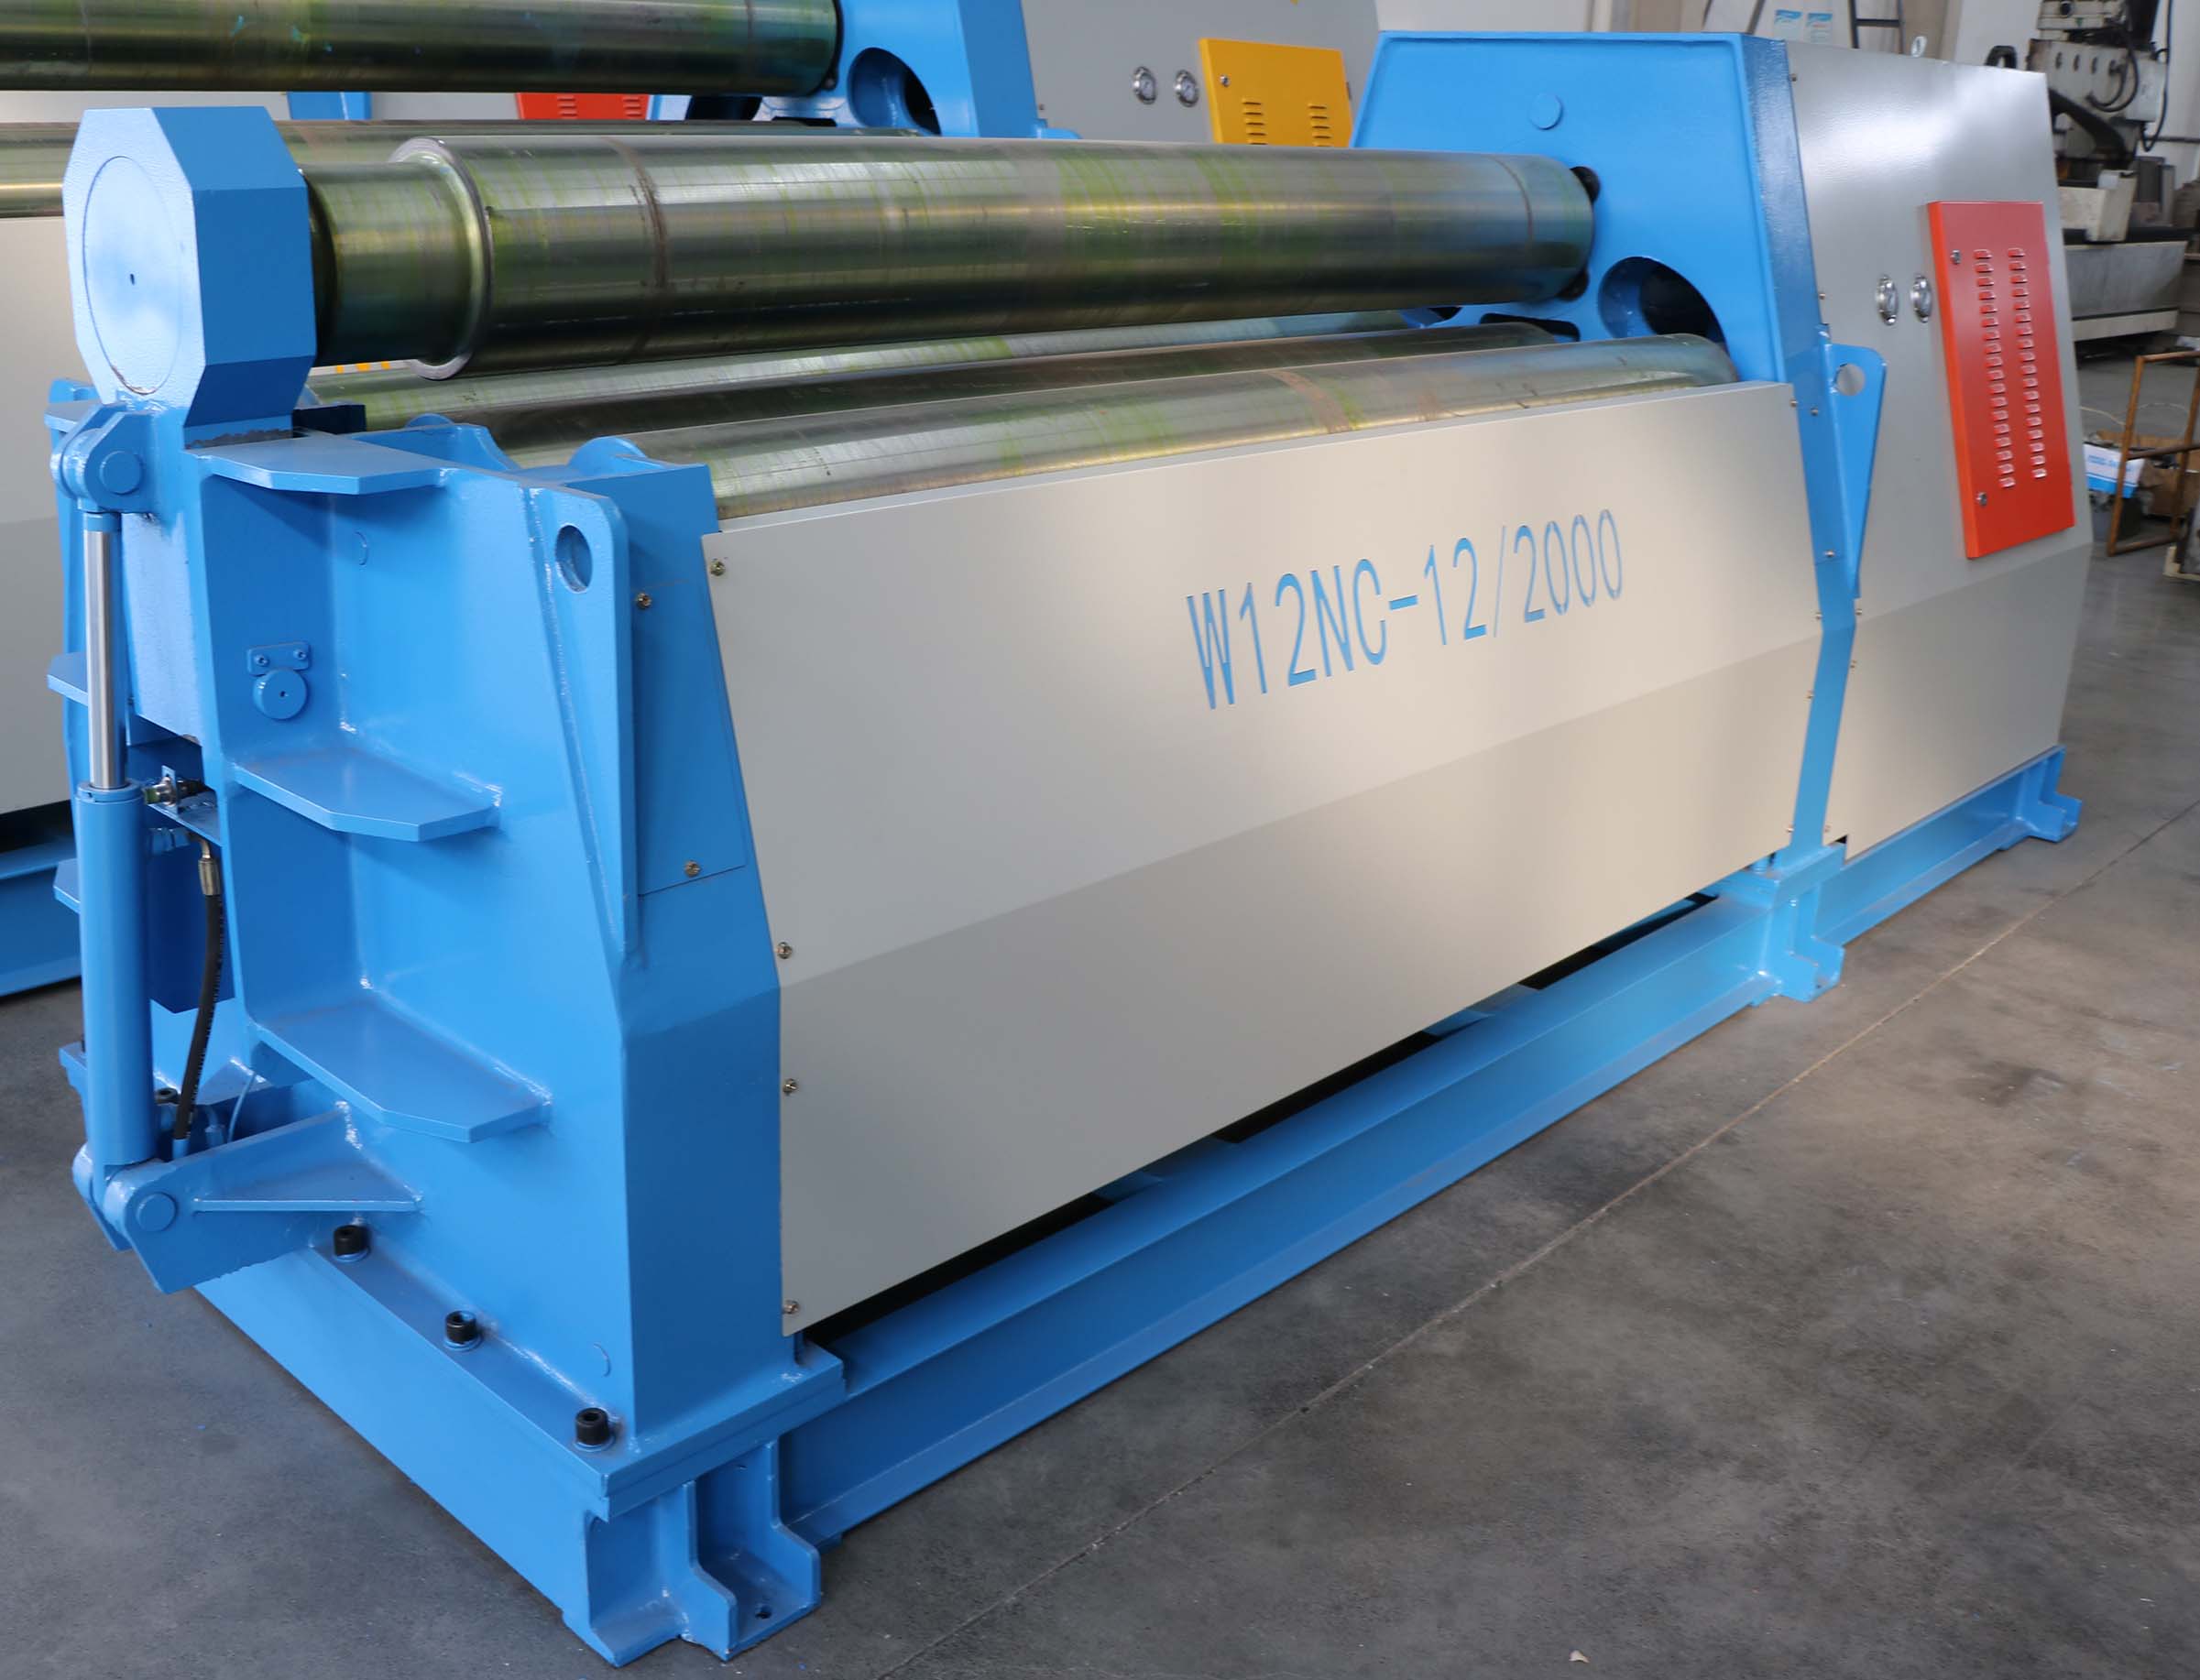 W12NC-12x2000 four rollers plate bending machine